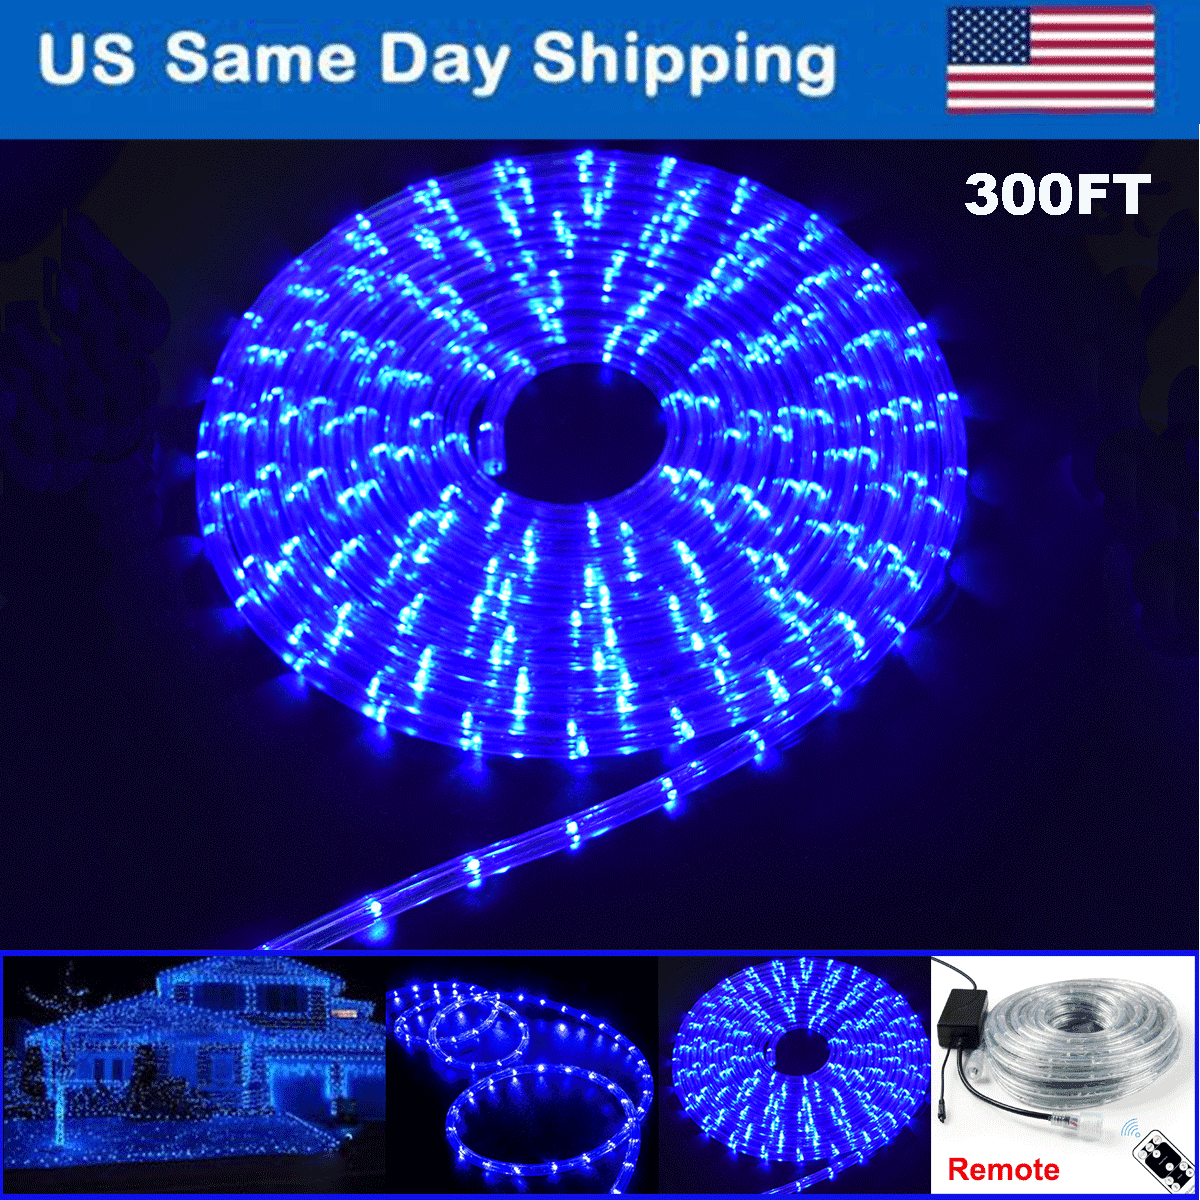 300 FT LED Rope Light Cold White 110V Outdoor Xmas Decorative Party Lighting US 